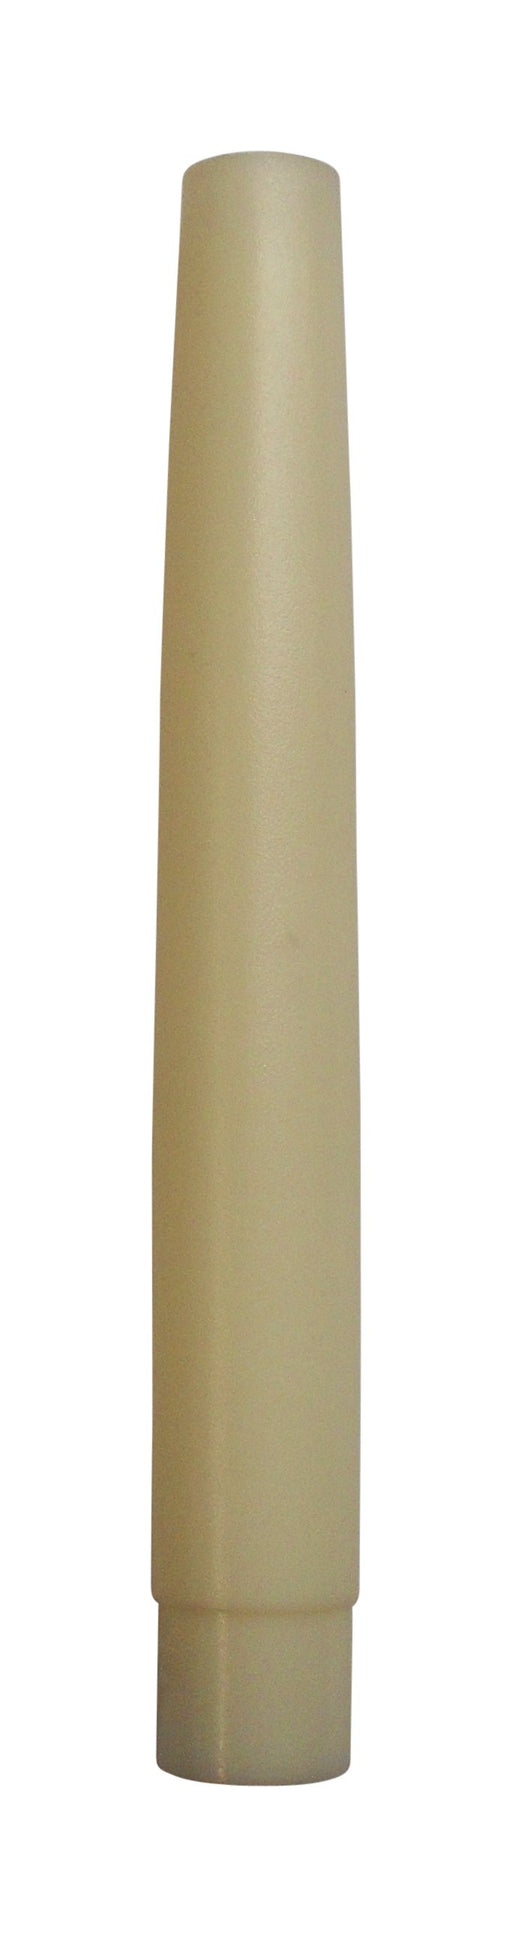 05539 E10 6" French Candle Cream 10mm Thread Entry - E10, 10mm Thread Entry - Lampfix - Sparks Warehouse